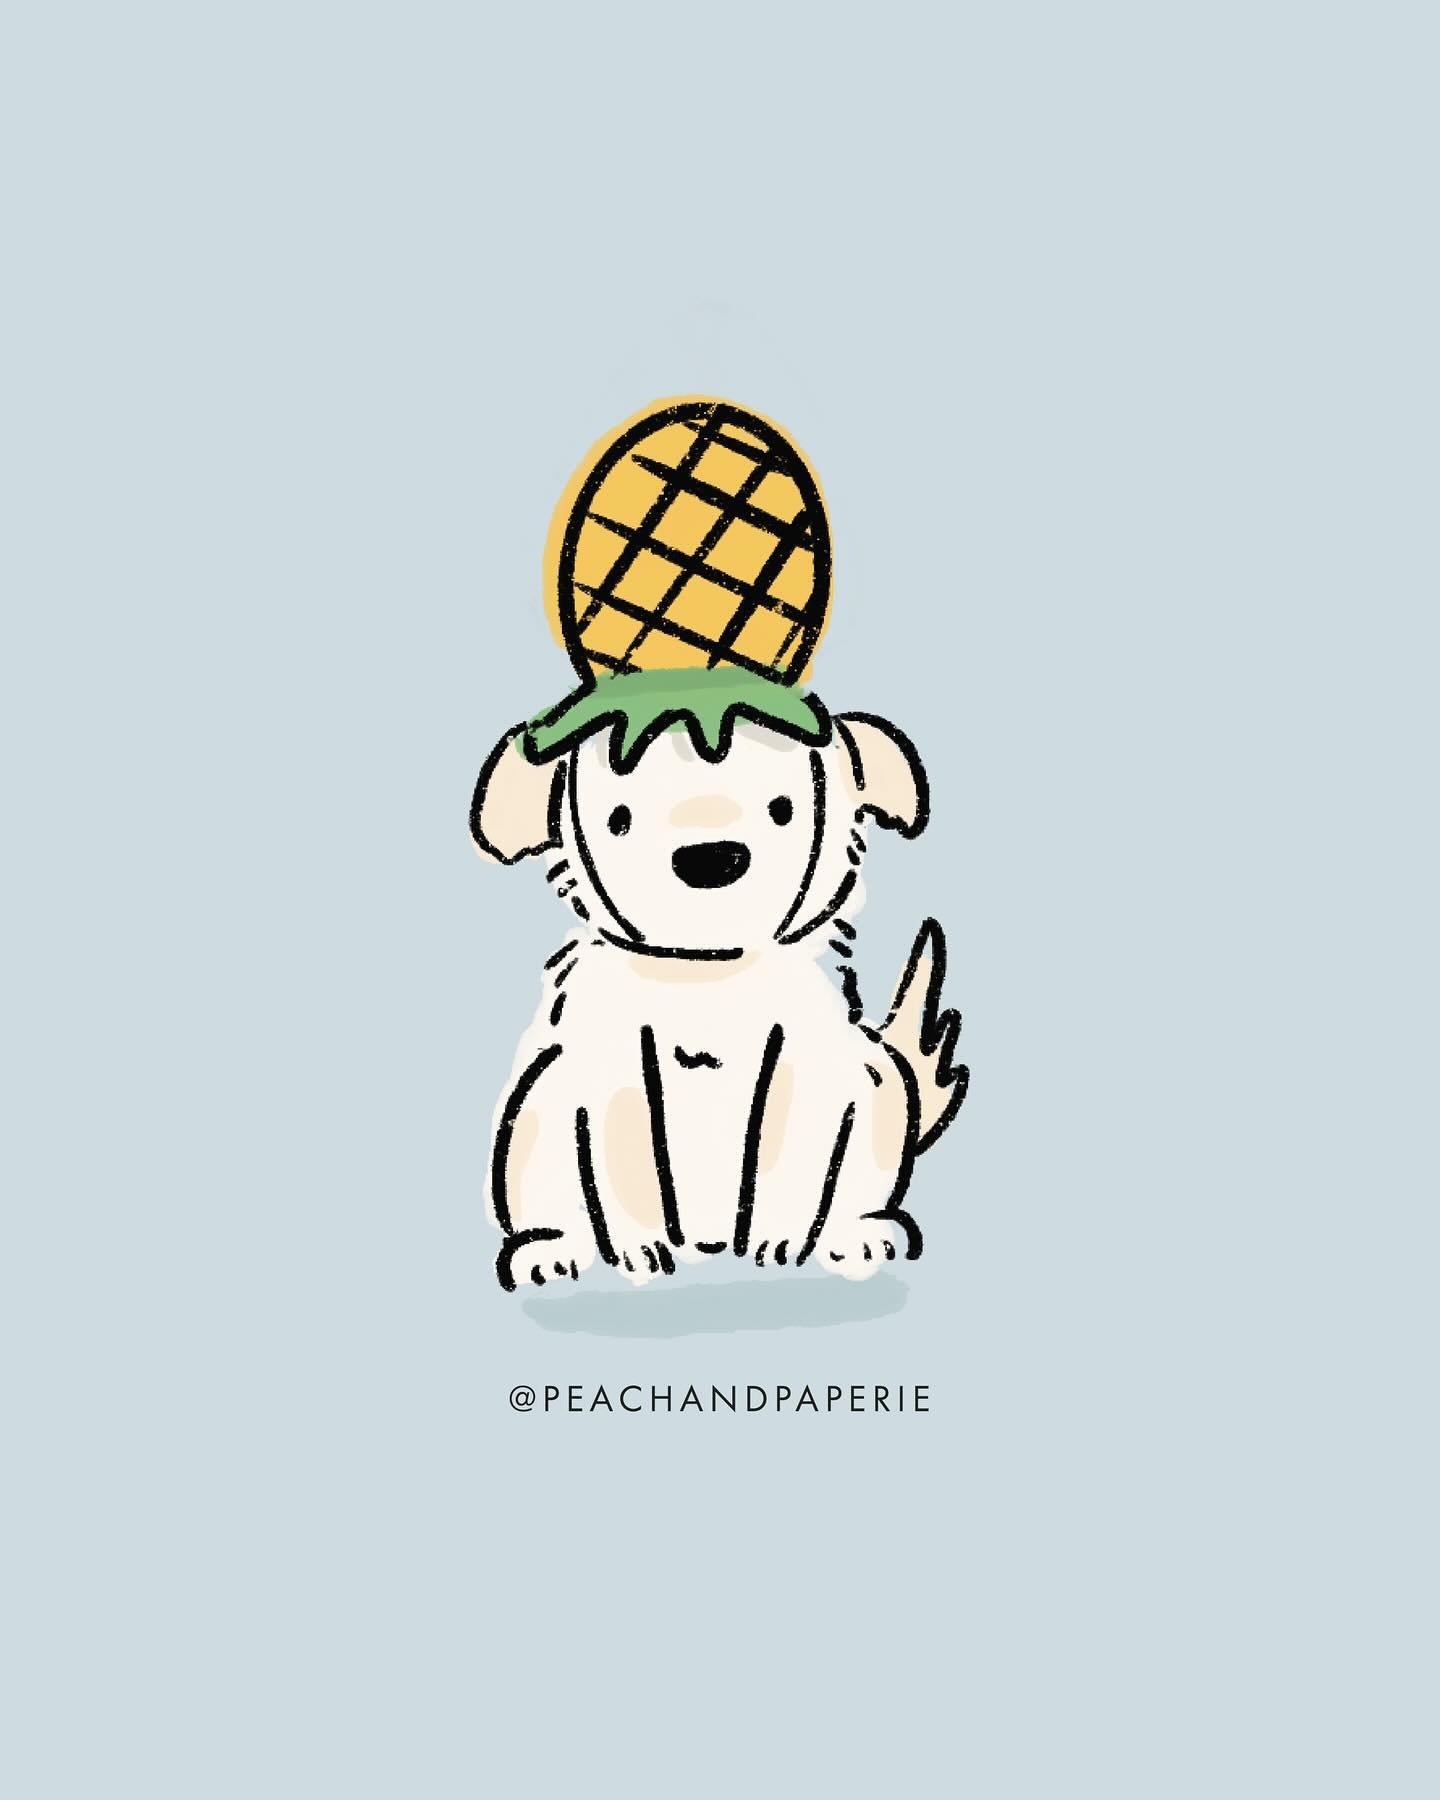 Me: My to-do list is so long
Also me: I wonder what my dog would look like in all these fruit hats 🍍🍓🍊🍎🍉

I&rsquo;ve been working on a fun personal project this week, which includes one of these illustrations. This is a bit different from my usu